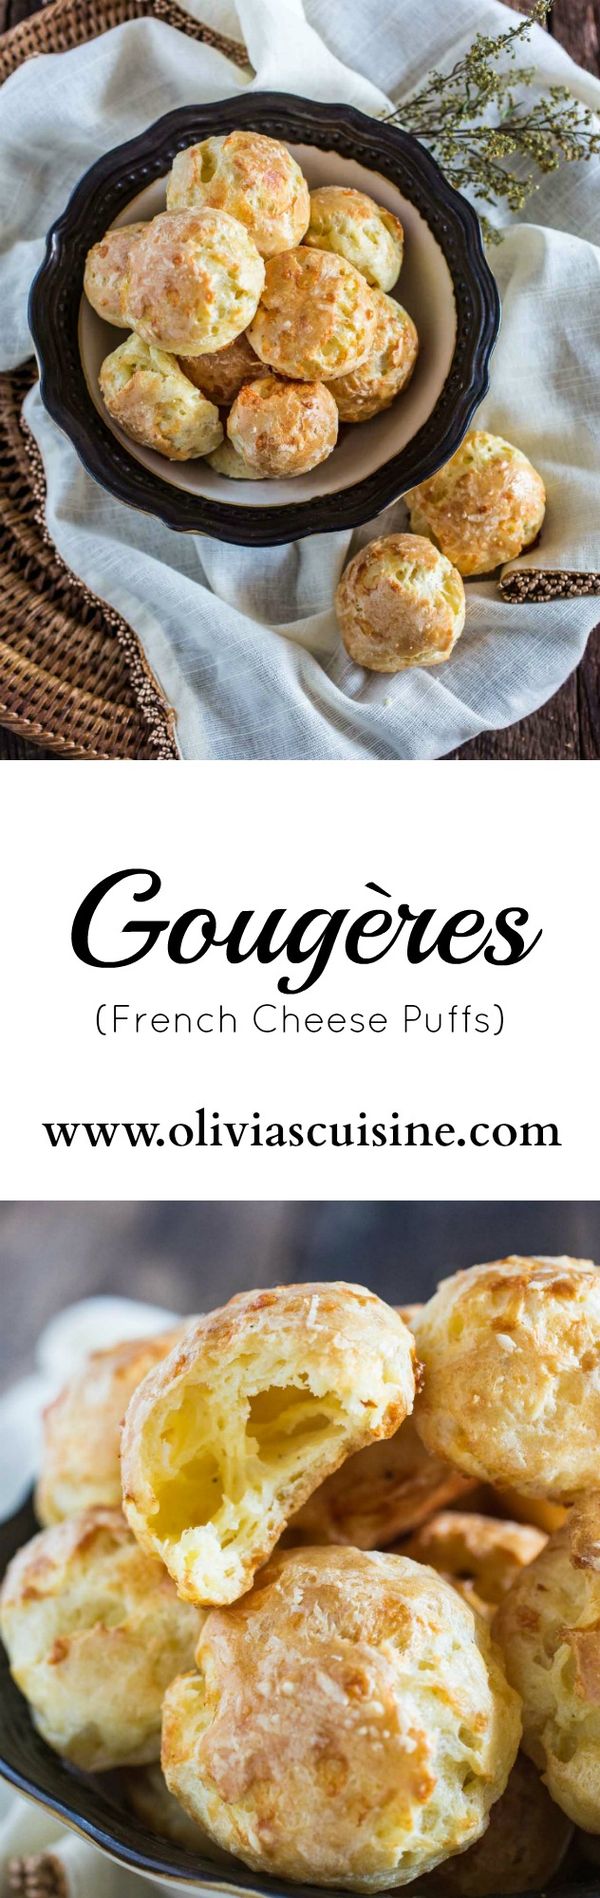 Gougeres (French Cheese Puffs